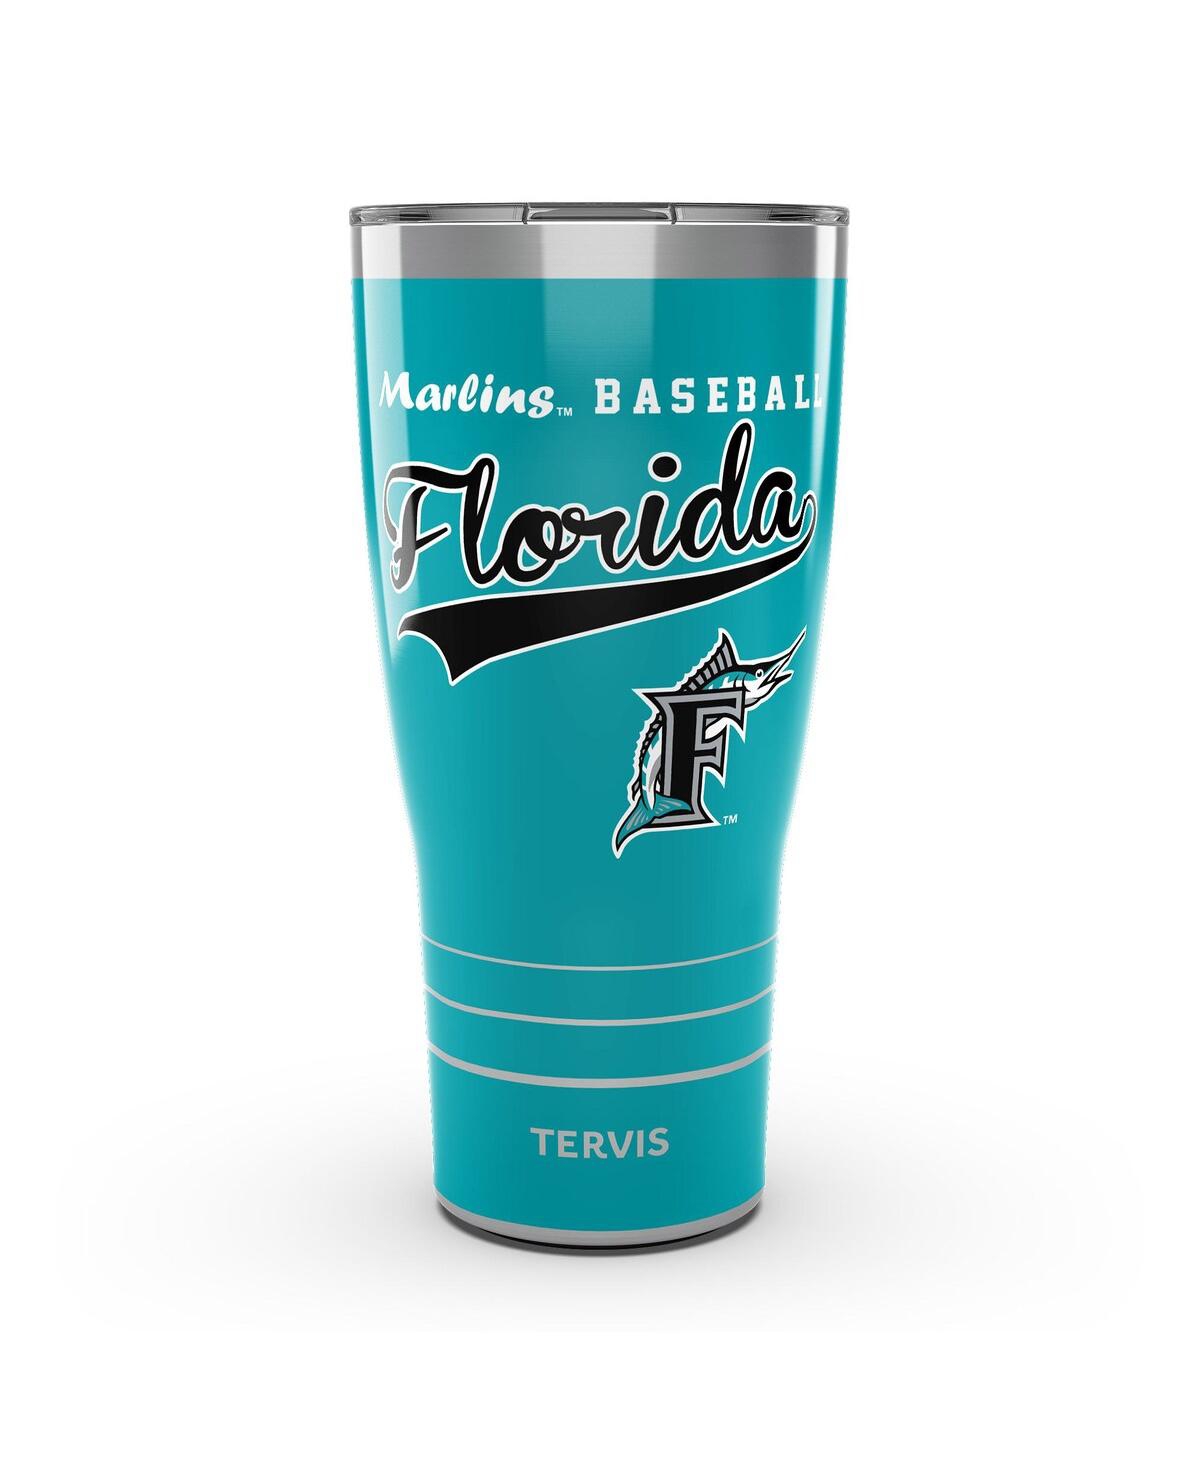 Tervis Tumbler Florida Marlins 30 oz Cooperstown Collection Vintage-like Stainless Steel Tumbler In Teal